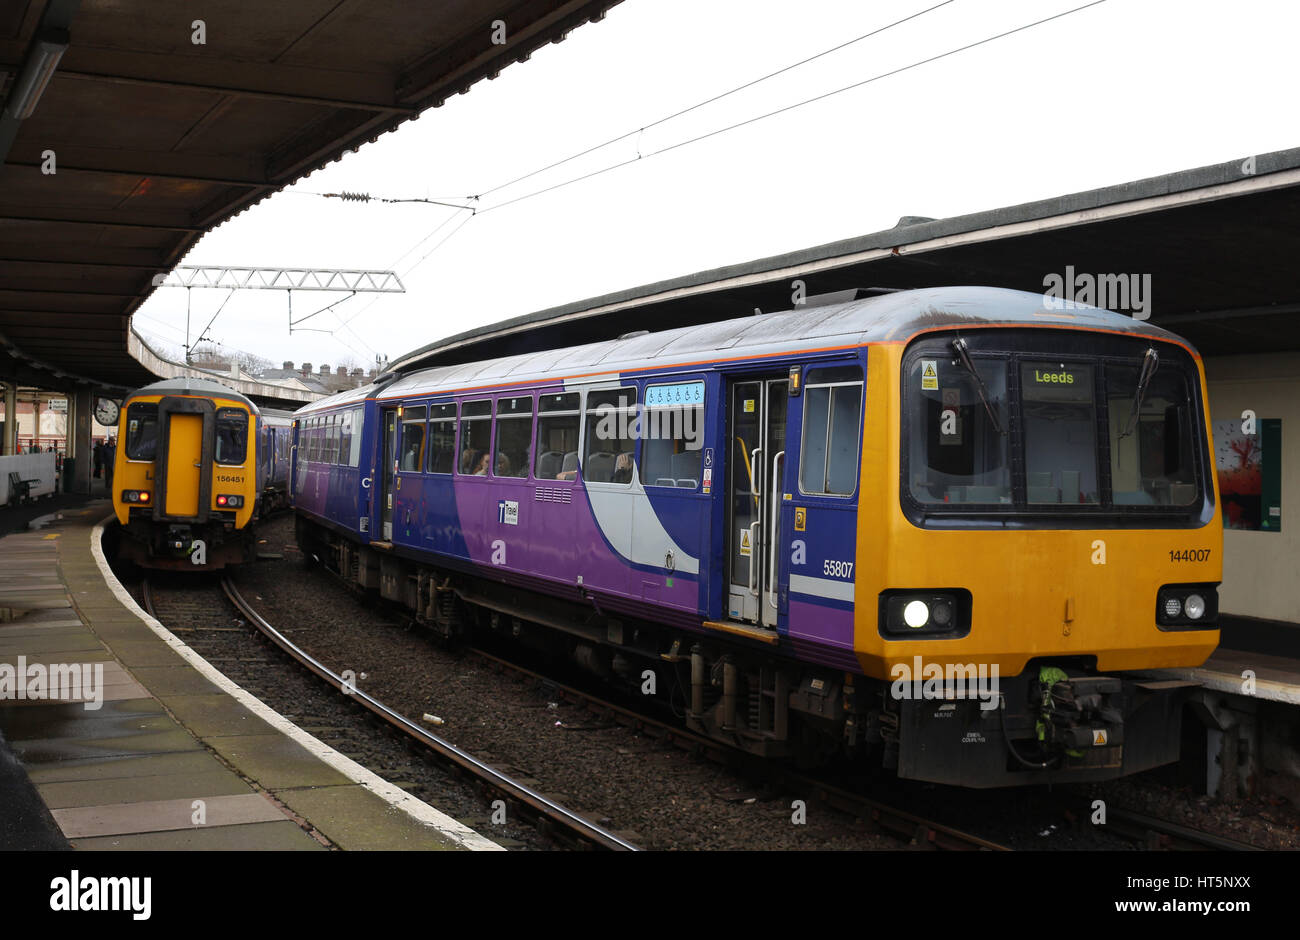 Diesel multiple unit trains in Carnforth railway station, one is a class156 Sprinter and the other a class 144 Pacer both operated by Northern. Stock Photo